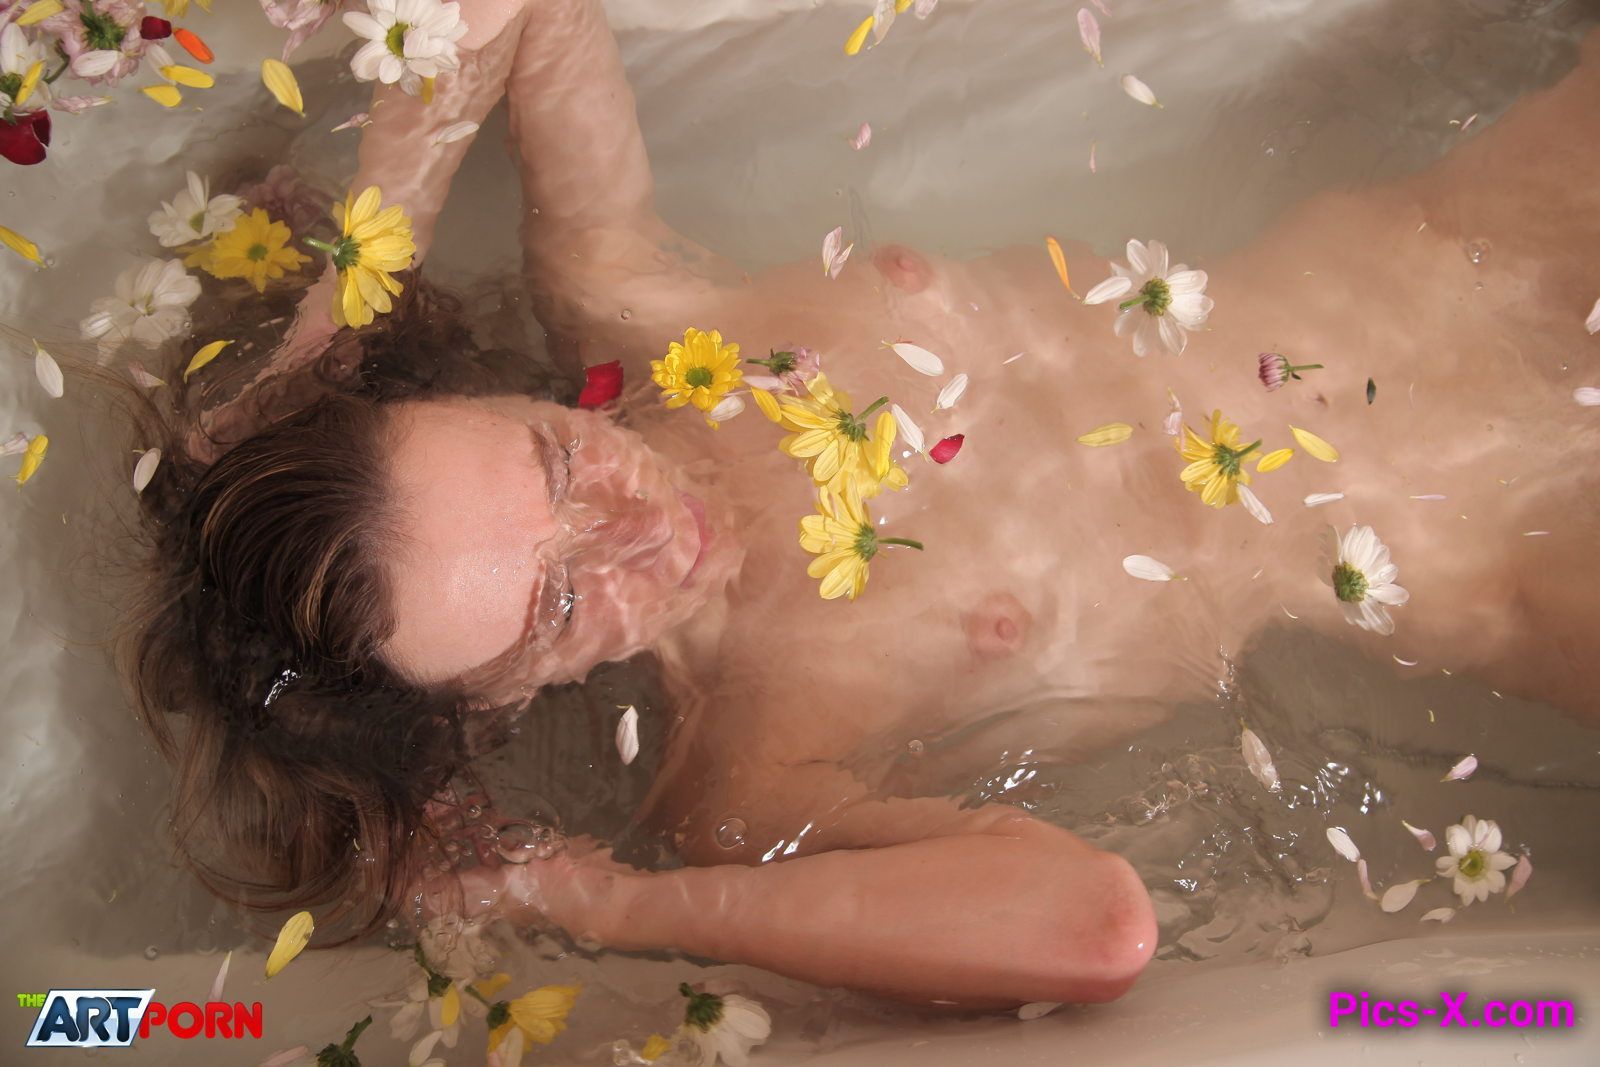 Bathing in flowers - The Art Porn - Image 1